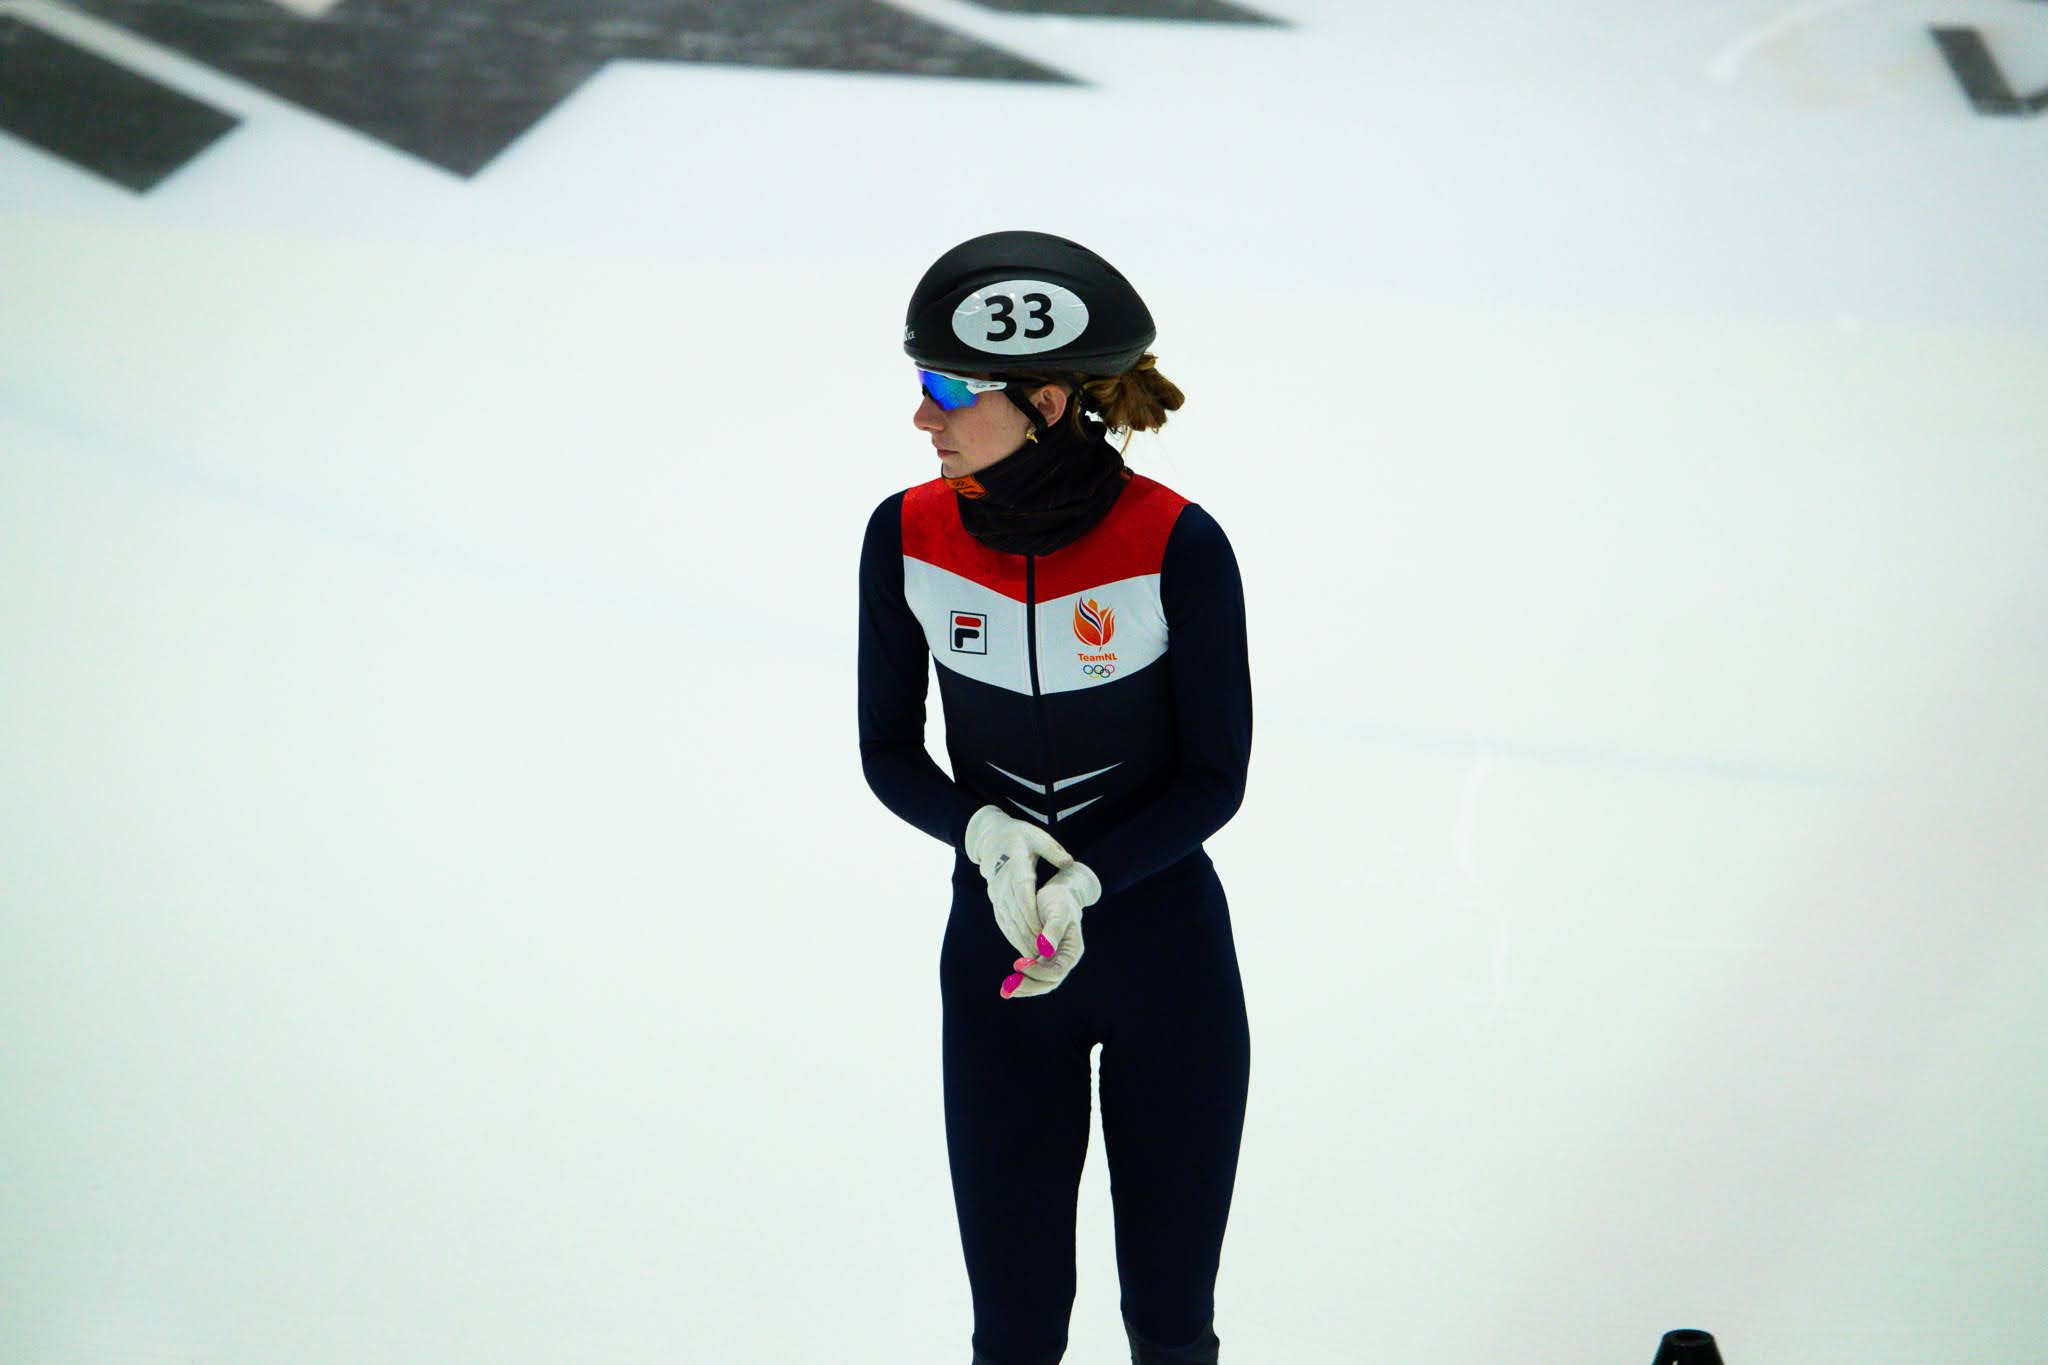 Deltrap earns second short track gold of Winter EYOF in 500m